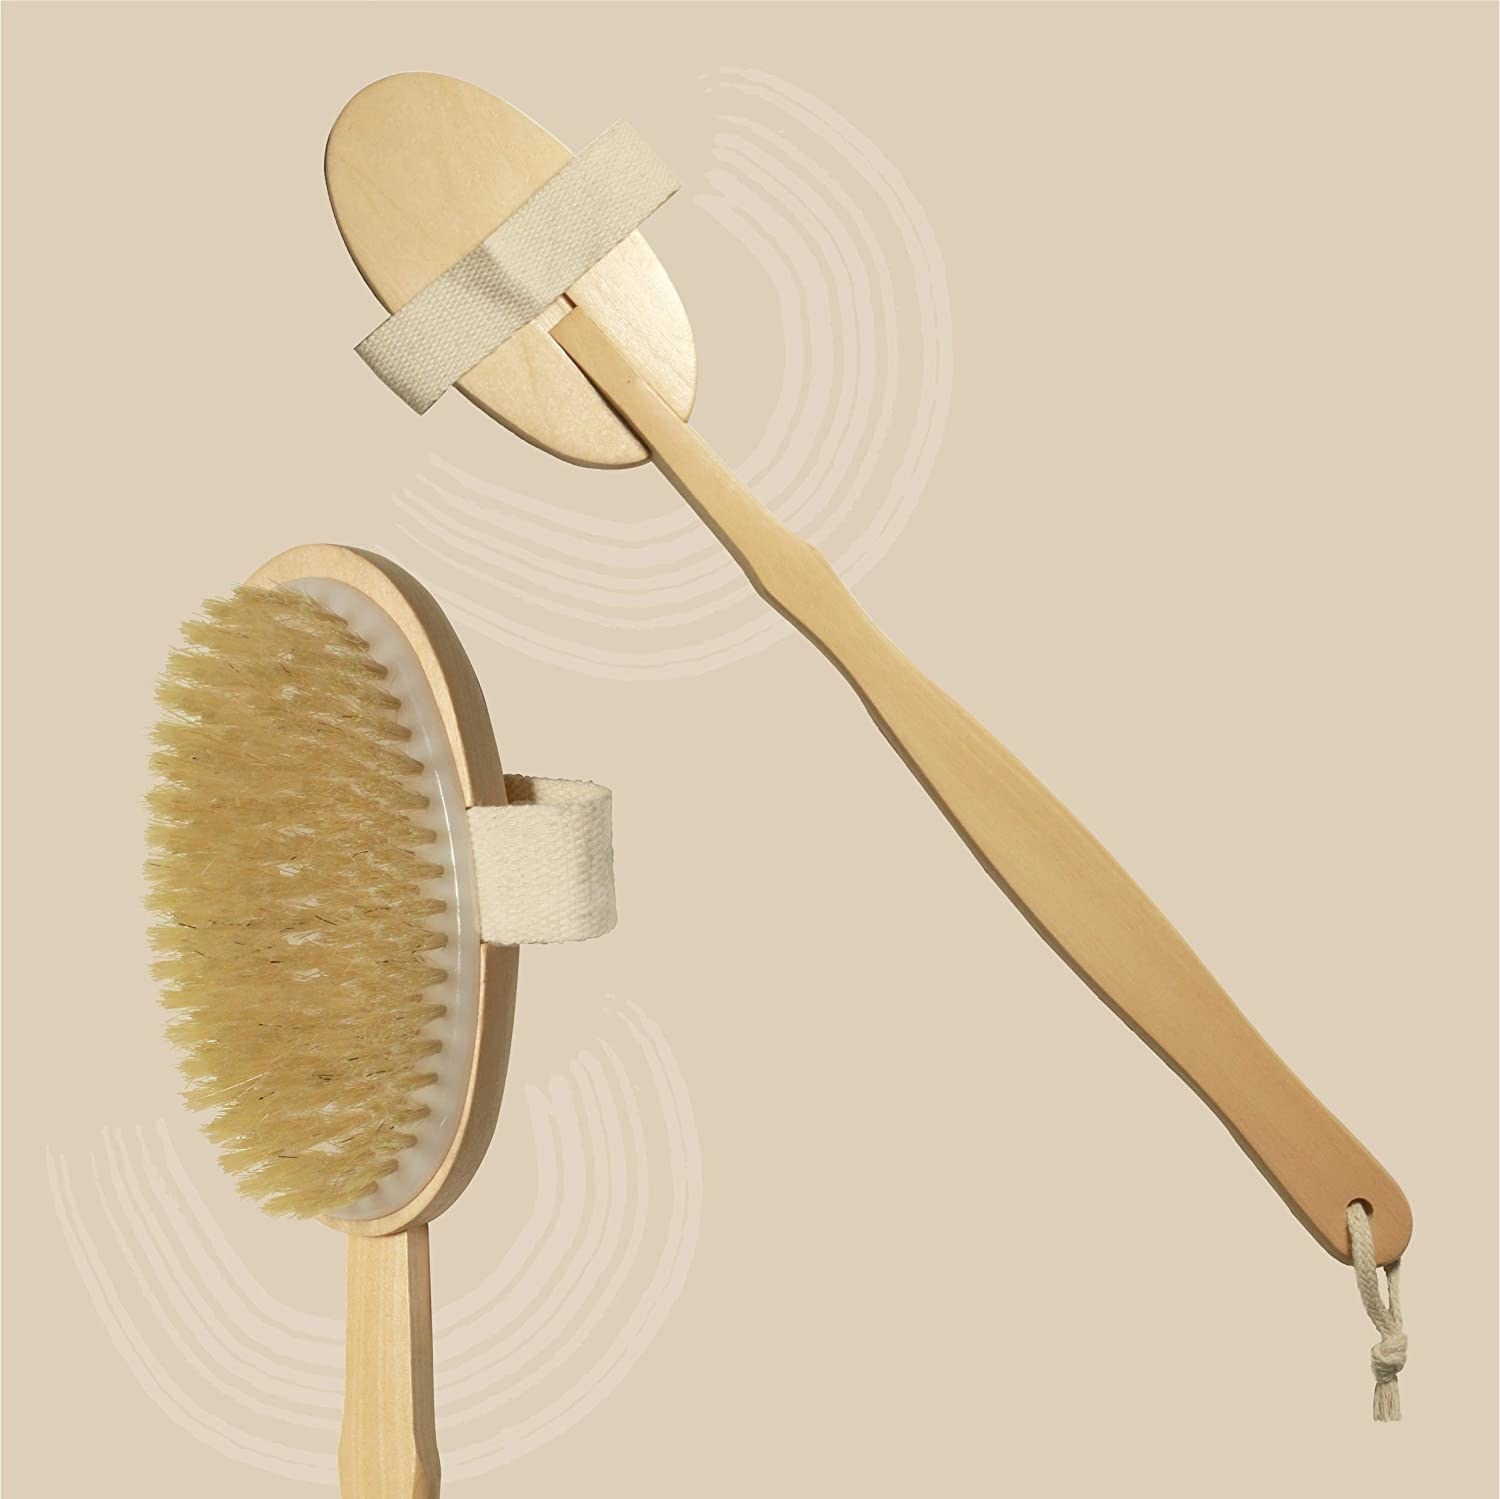 A 2-in-in fawn coloured body brush with a long detachable wooden handle.